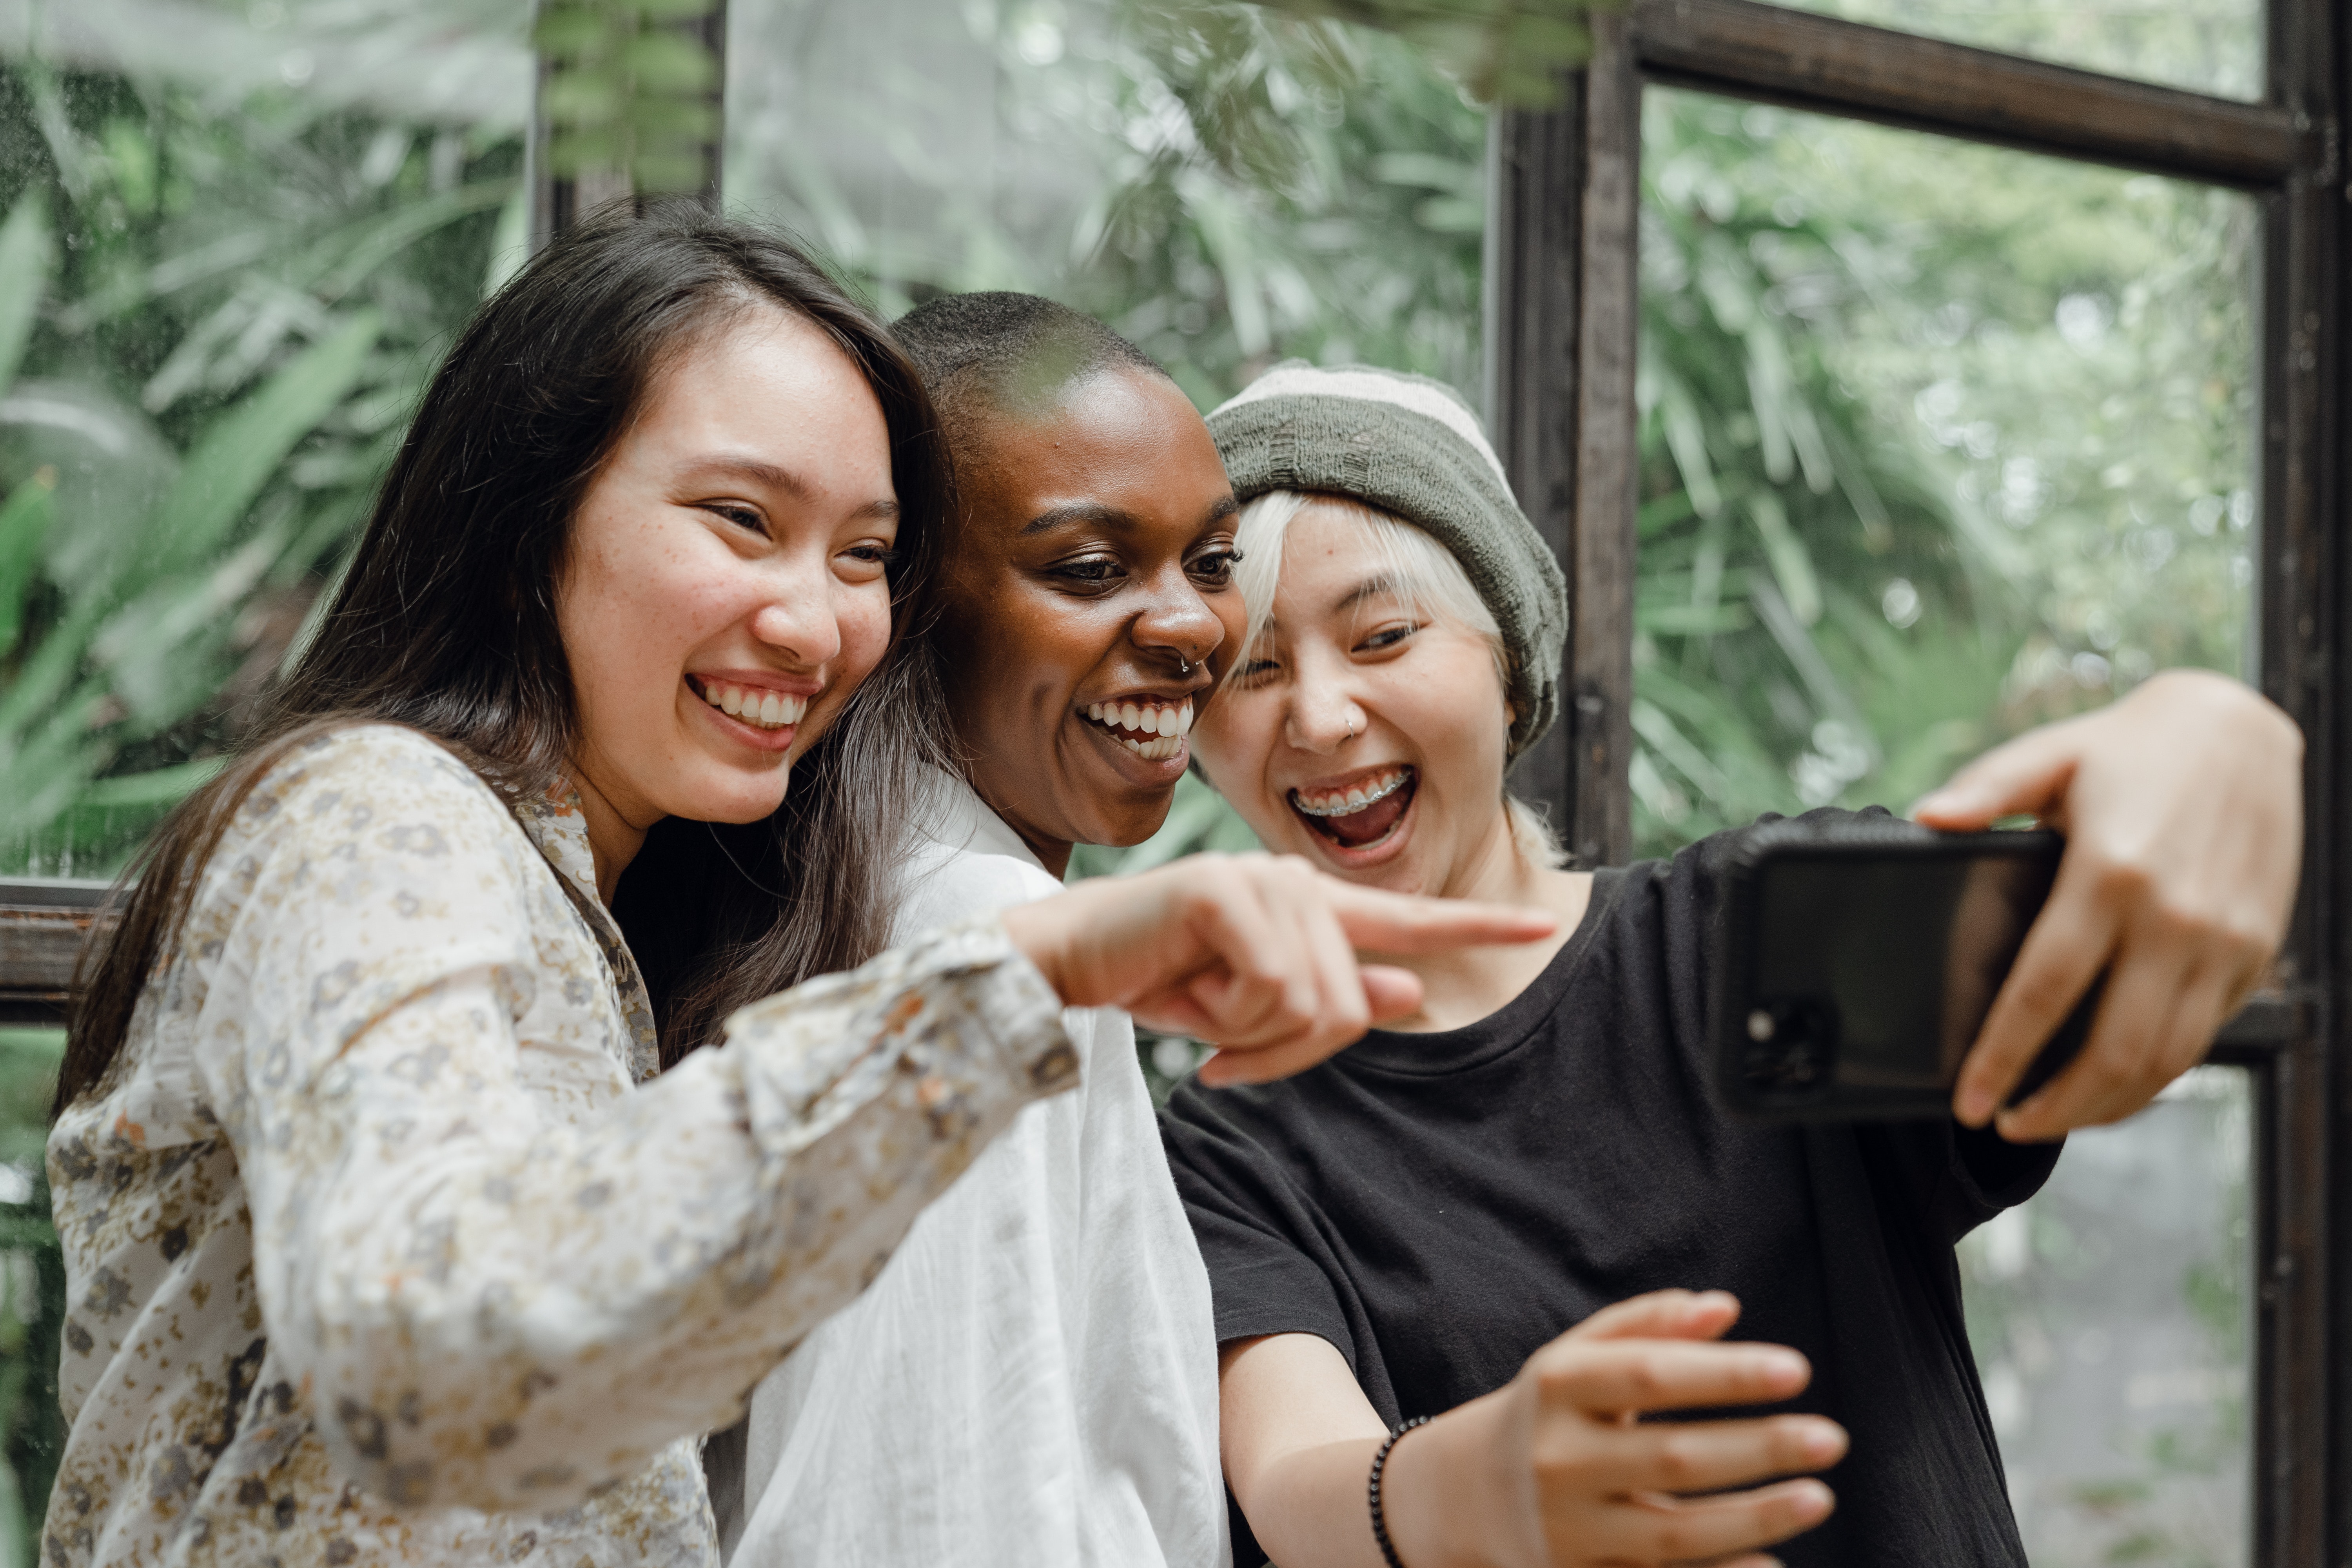 Image Description: Three laughing women looking at a mobile phone.